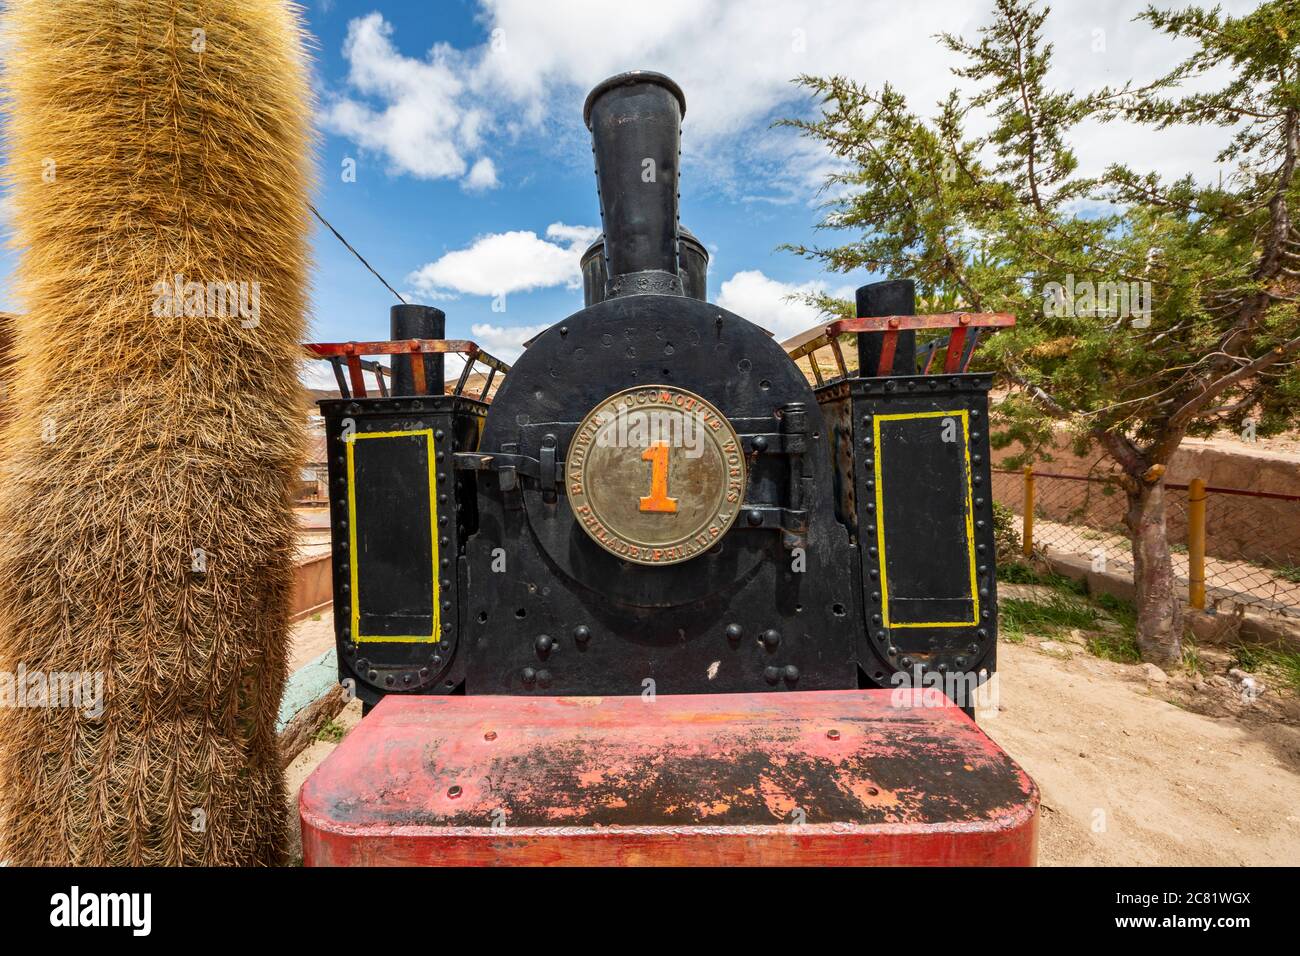 Baldwin locomotive 14301, built in 1895, partially restored and plinthed above mine entrance; Pulacayo, Potosi Department, Bolivia Stock Photo